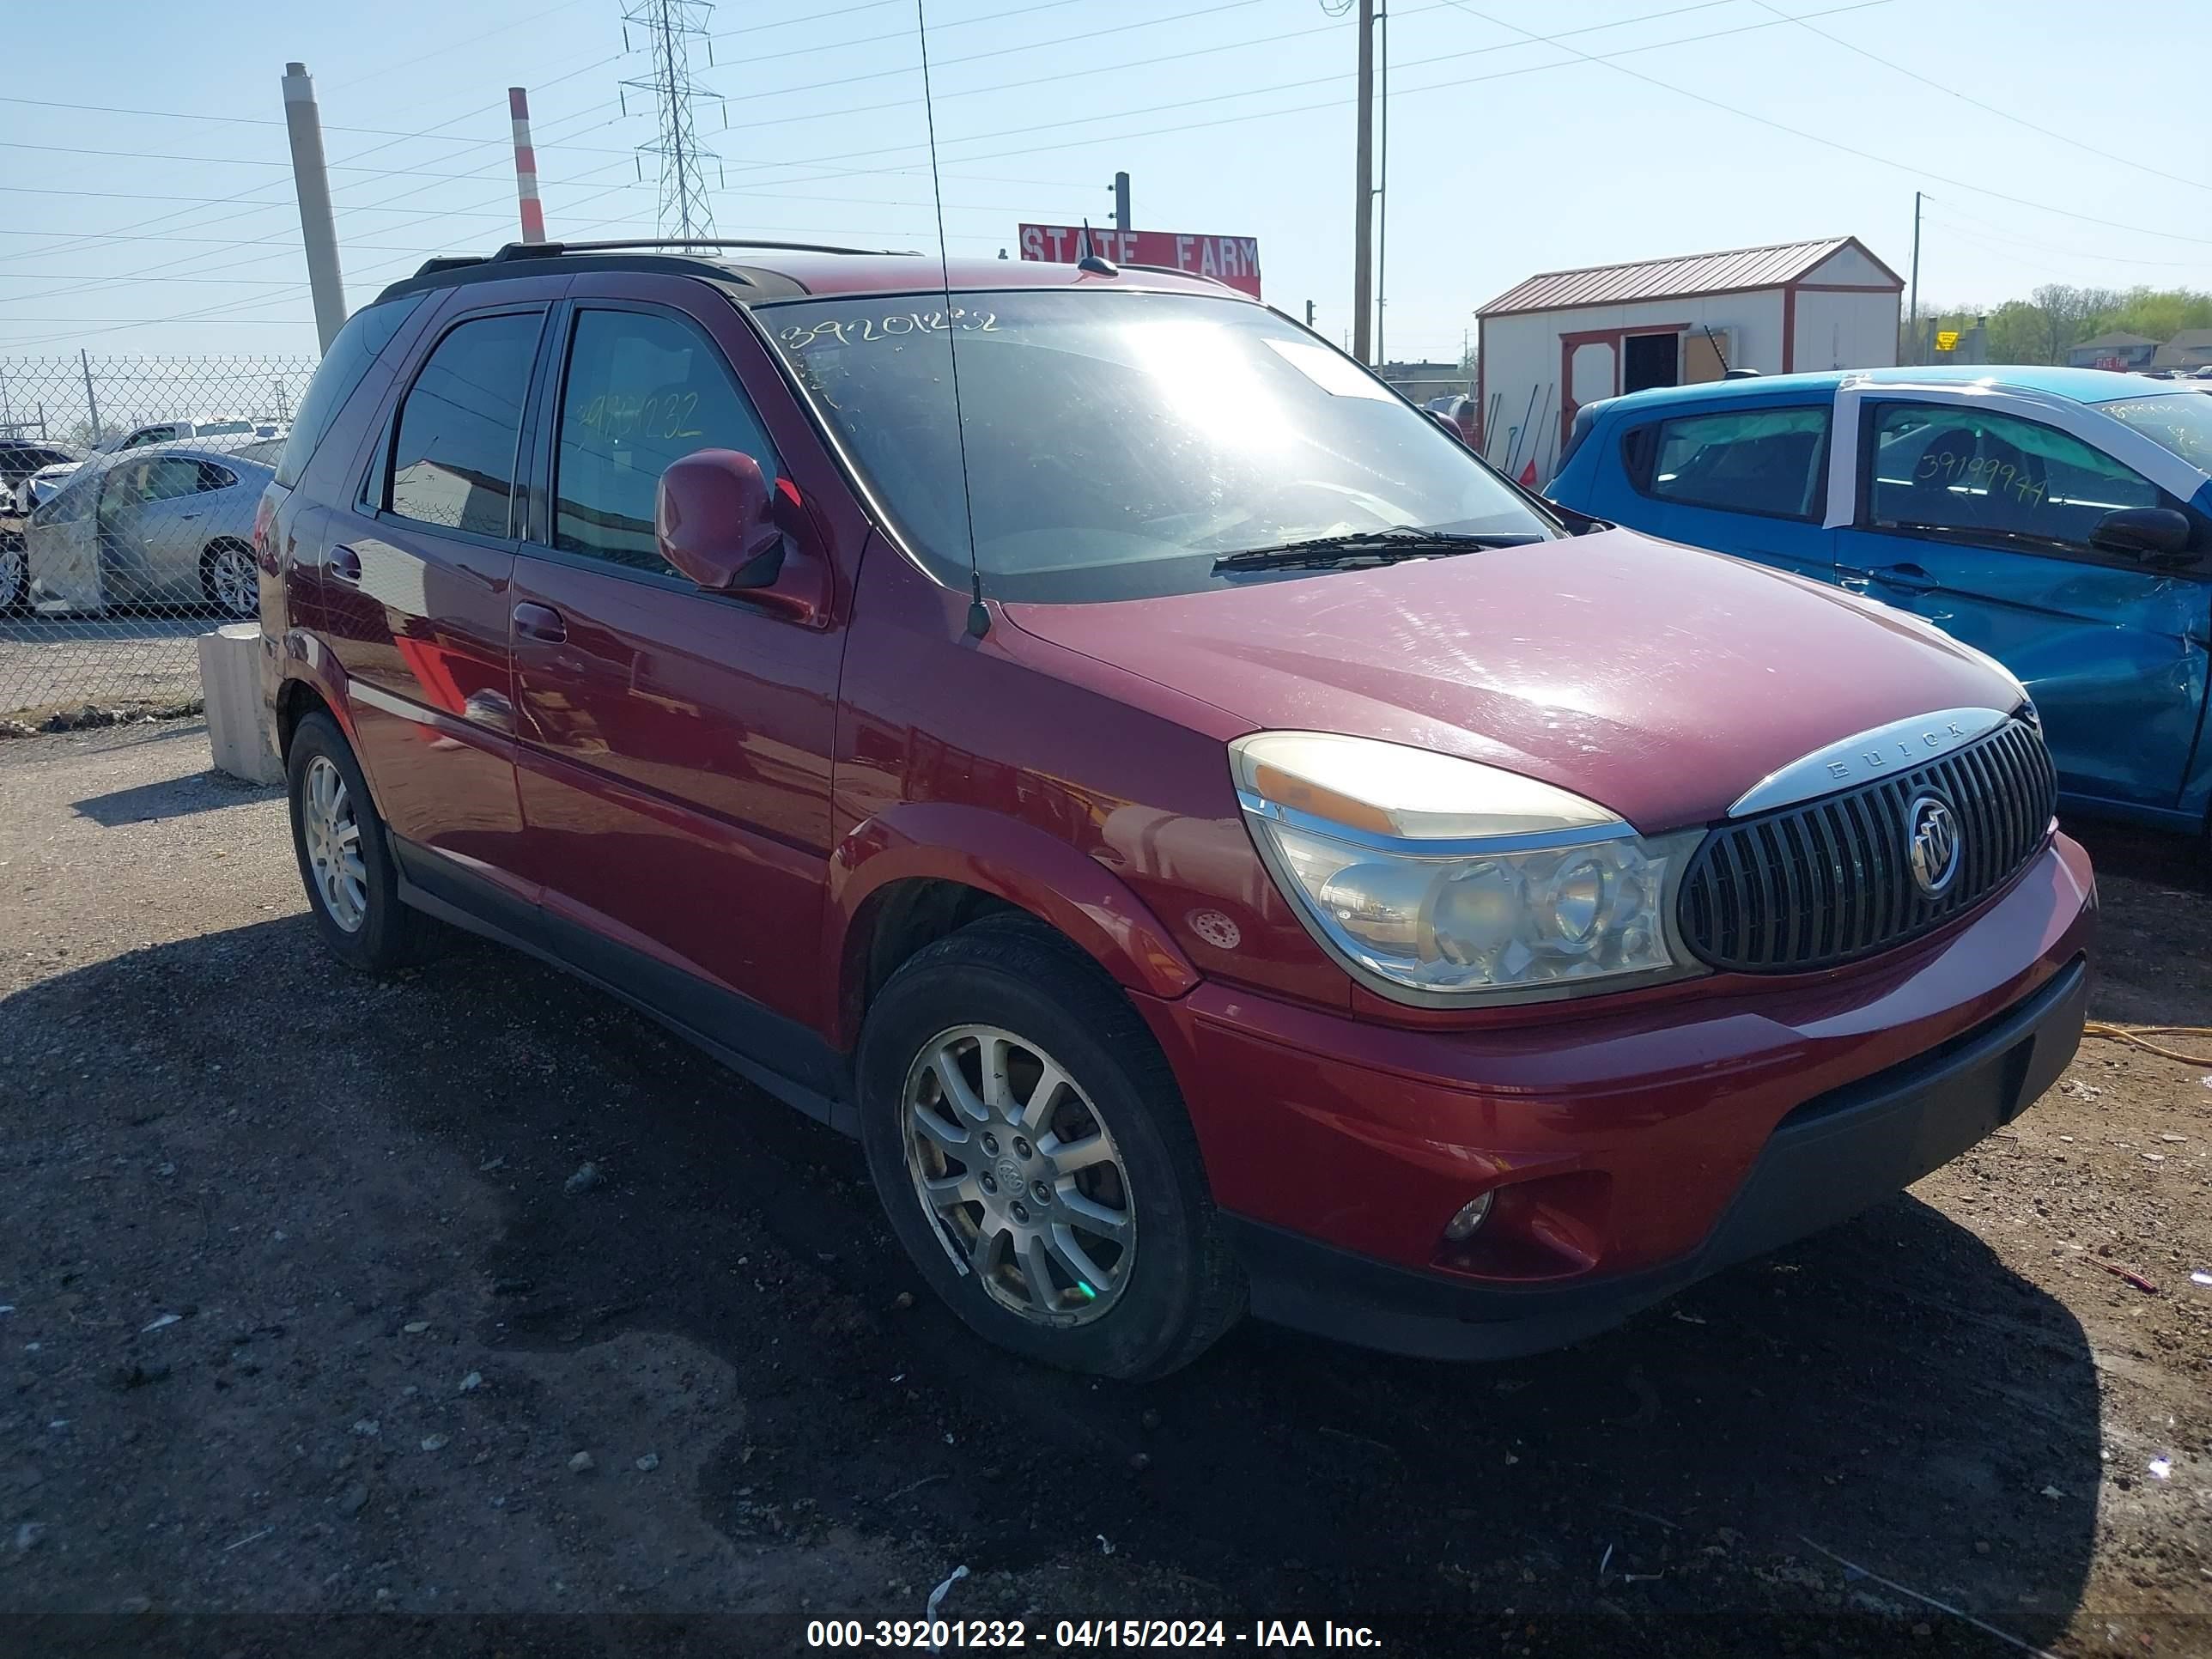 vin: 3G5DB03L86S565543 3G5DB03L86S565543 2006 buick rendezvous 3500 for Sale in 46217, 3302 S Harding St, Indianapolis, Indiana, USA